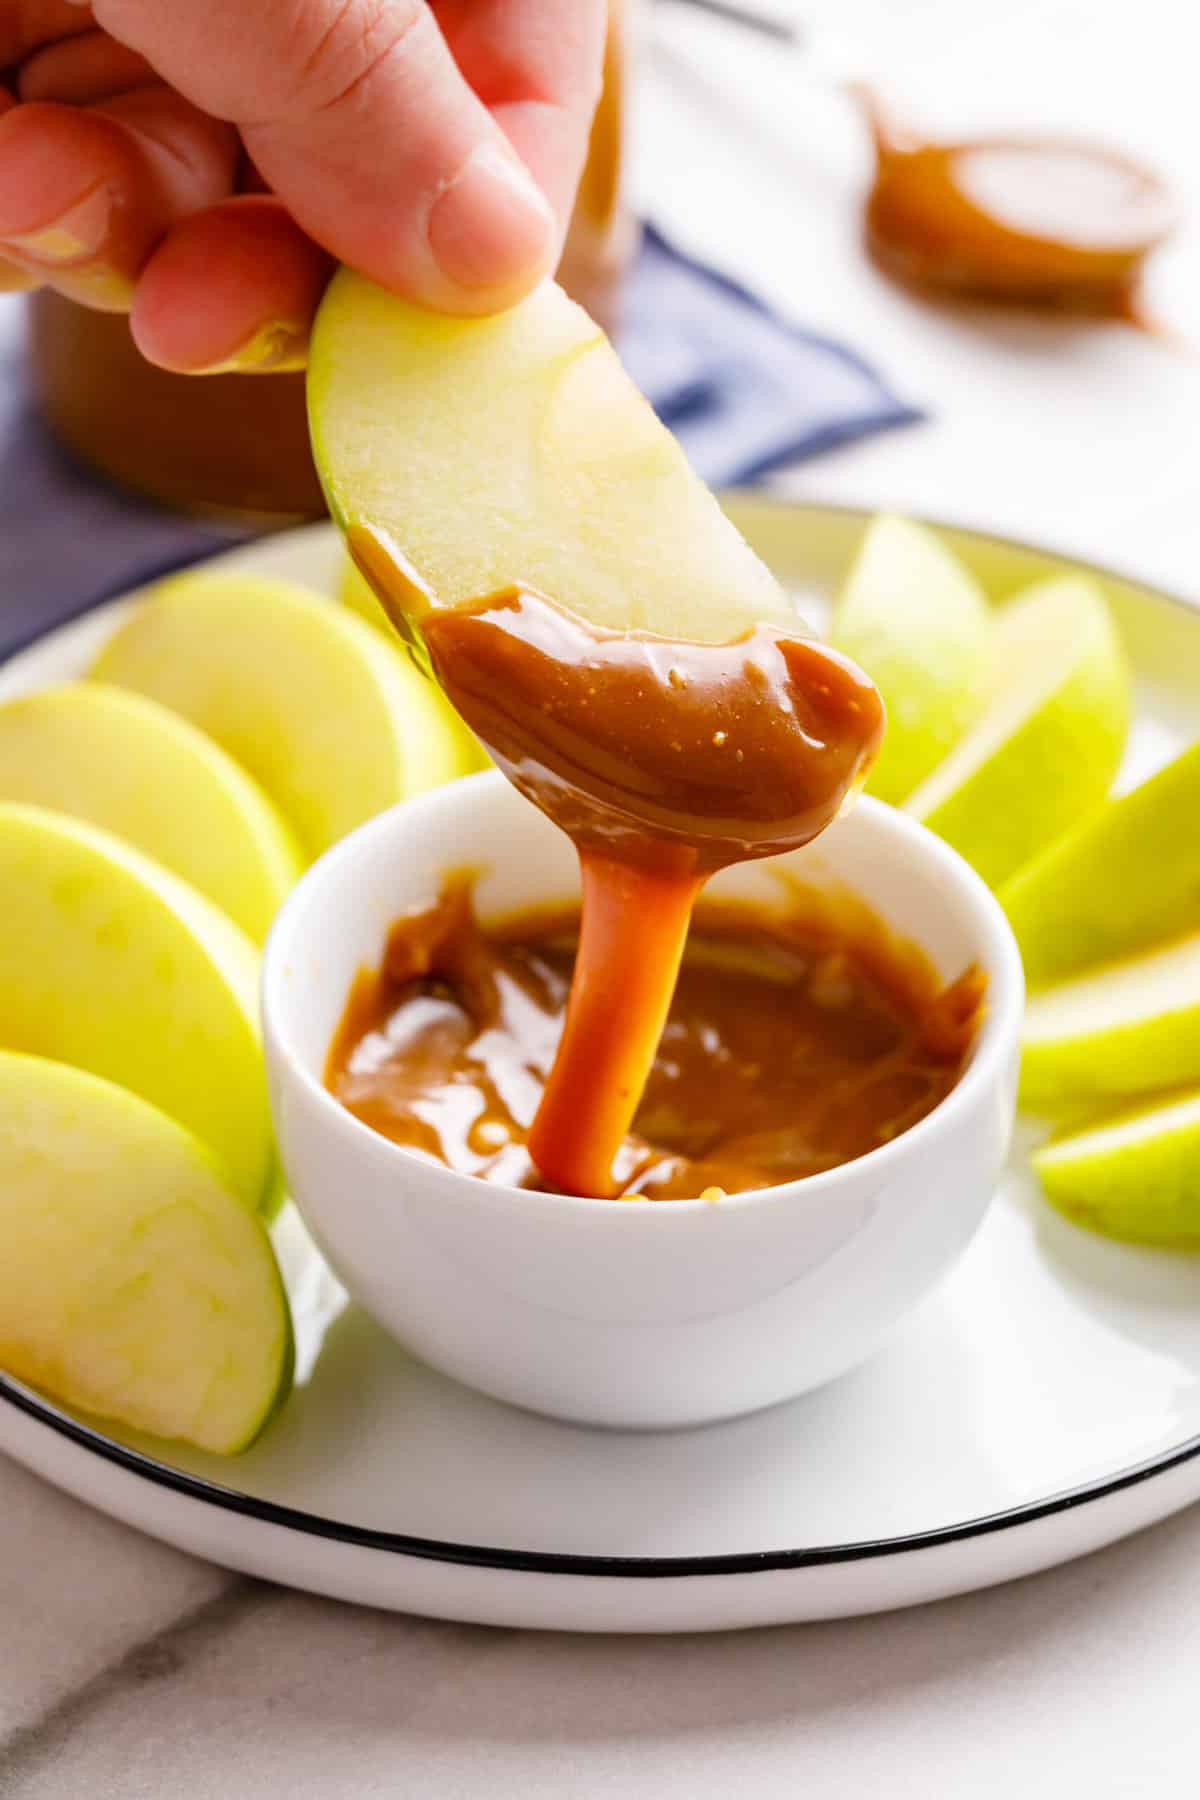 granny smith apple dipped in homemade caramel sauce